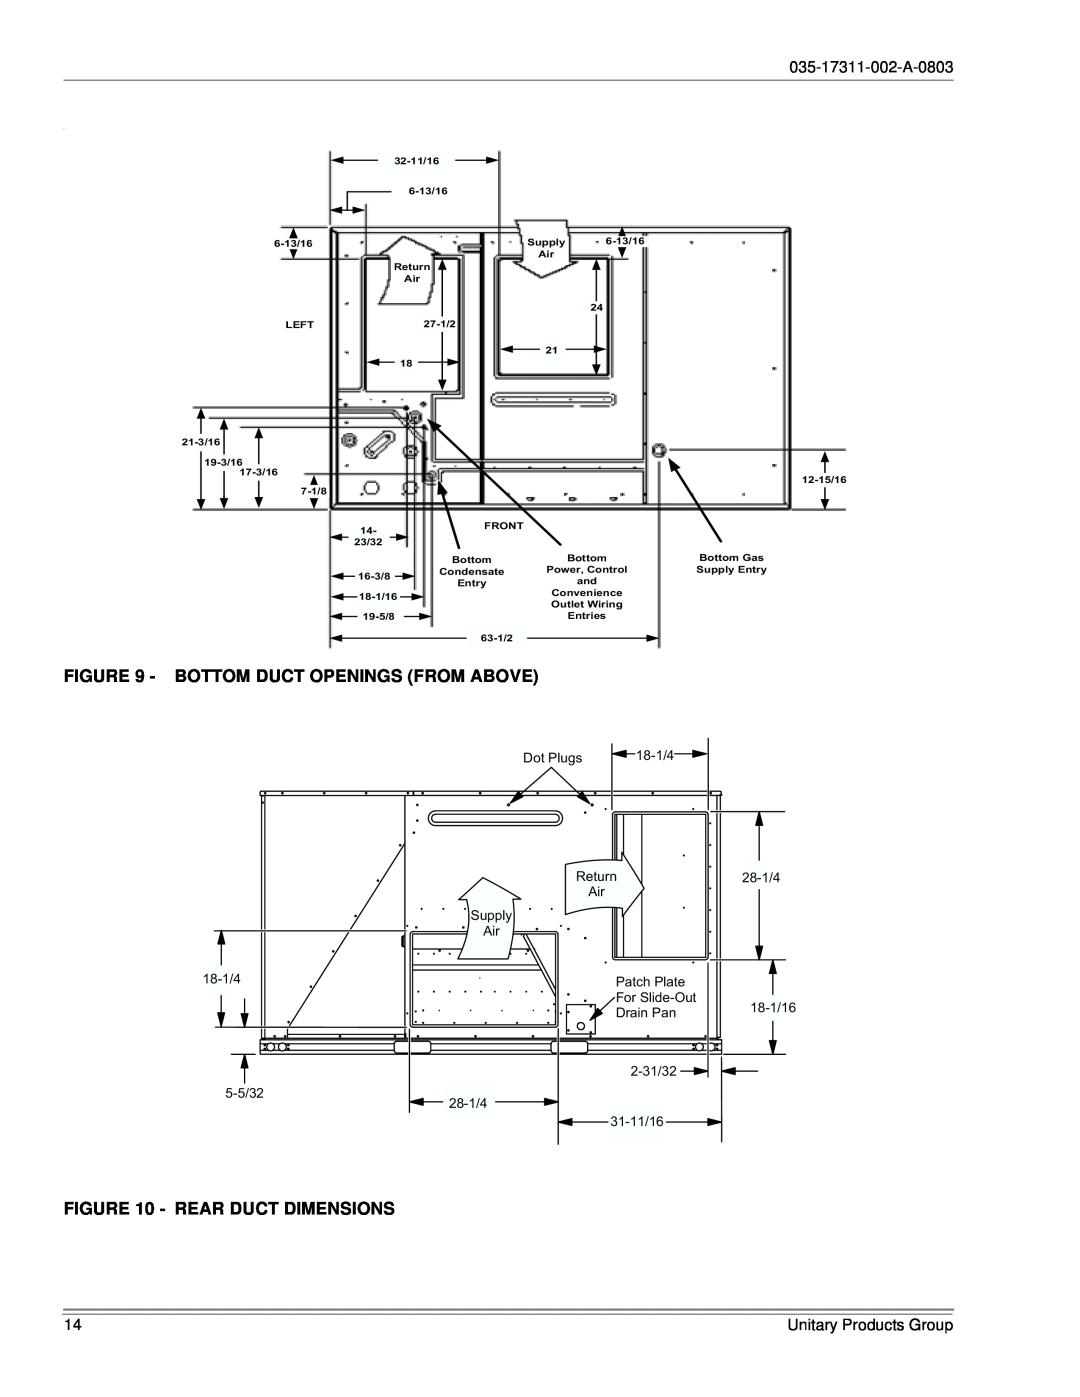 York 150, 120 installation manual Bottom Duct Openings From Above, Rear Duct Dimensions, 035-17311-002-A-0803 